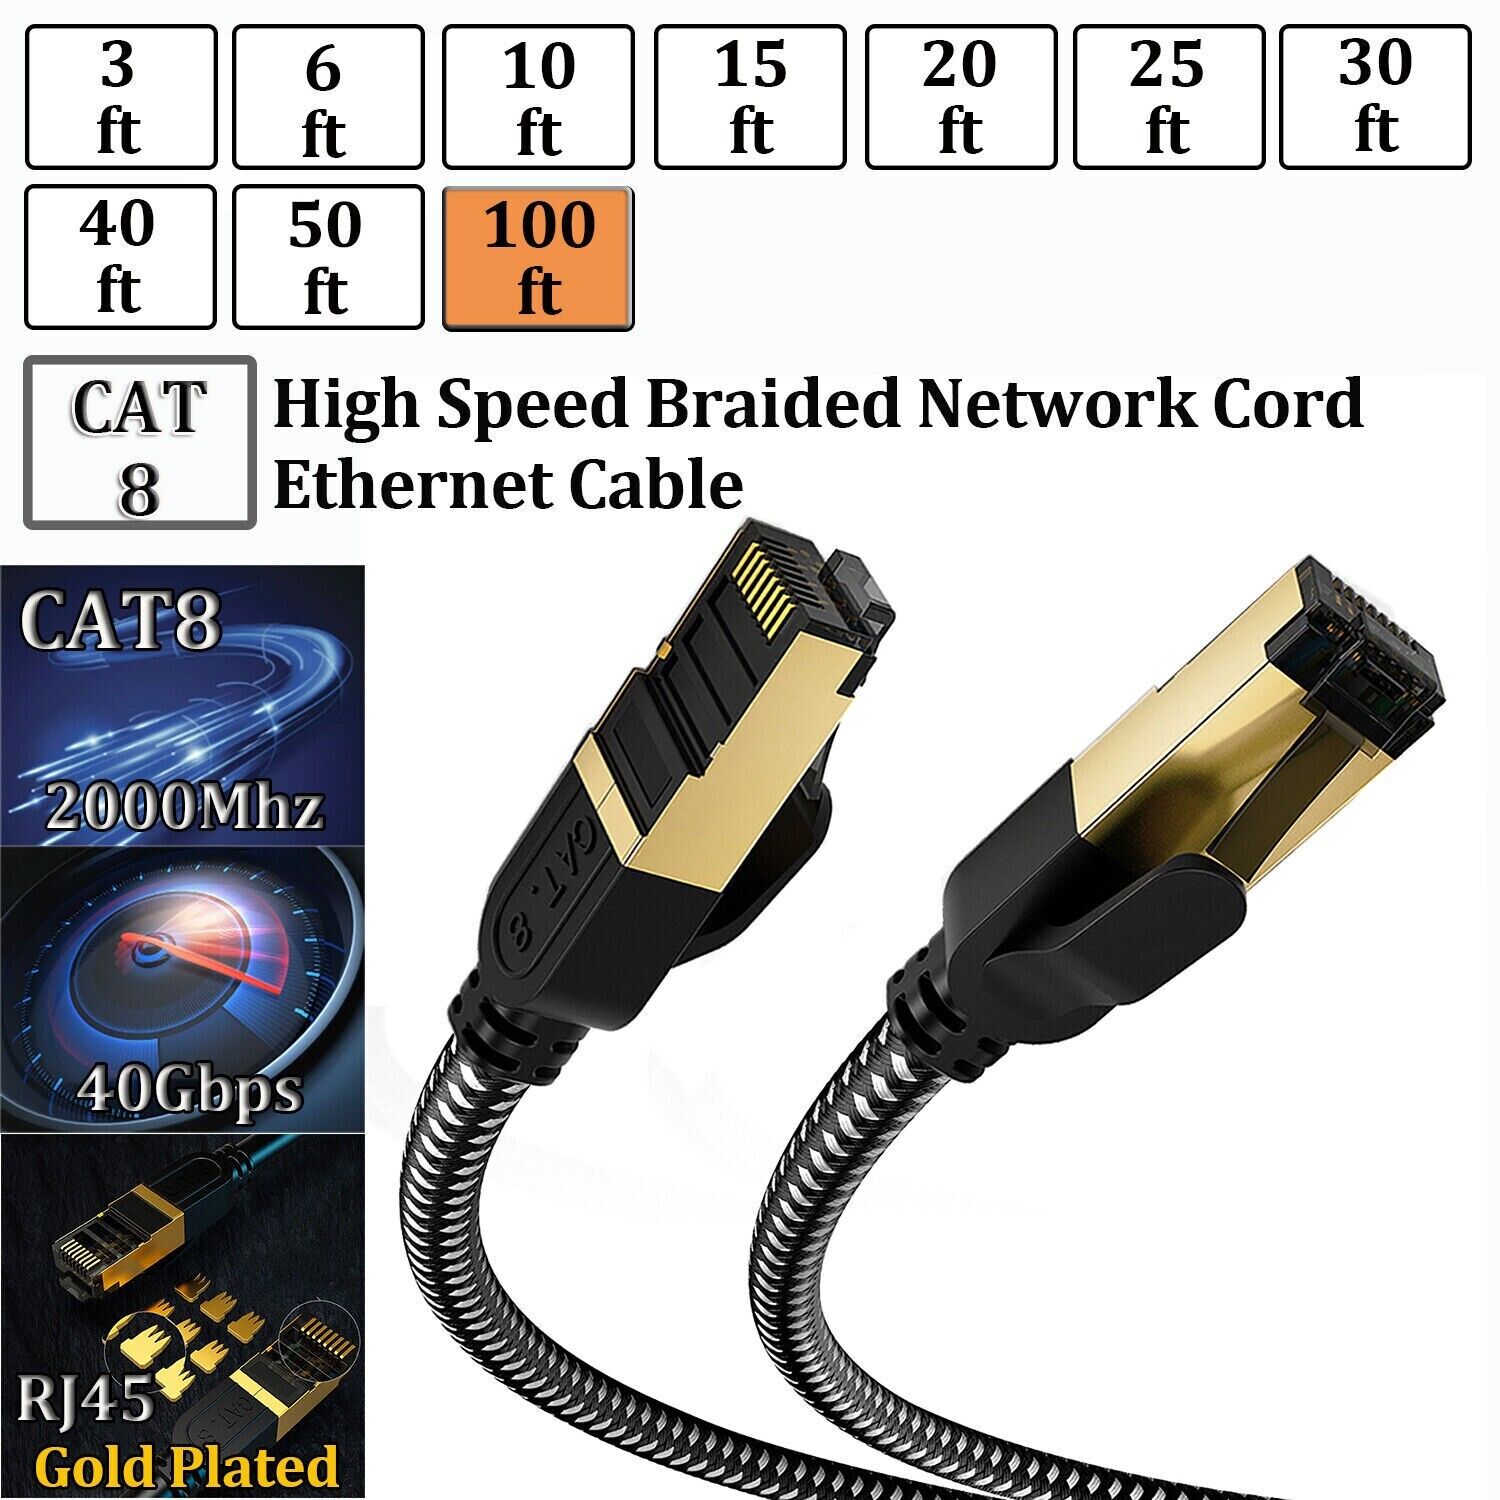 Cat 8 Braided Ethernet Cable RJ45 Super Speed 40Gbps 2000Mhz LAN Network Lot